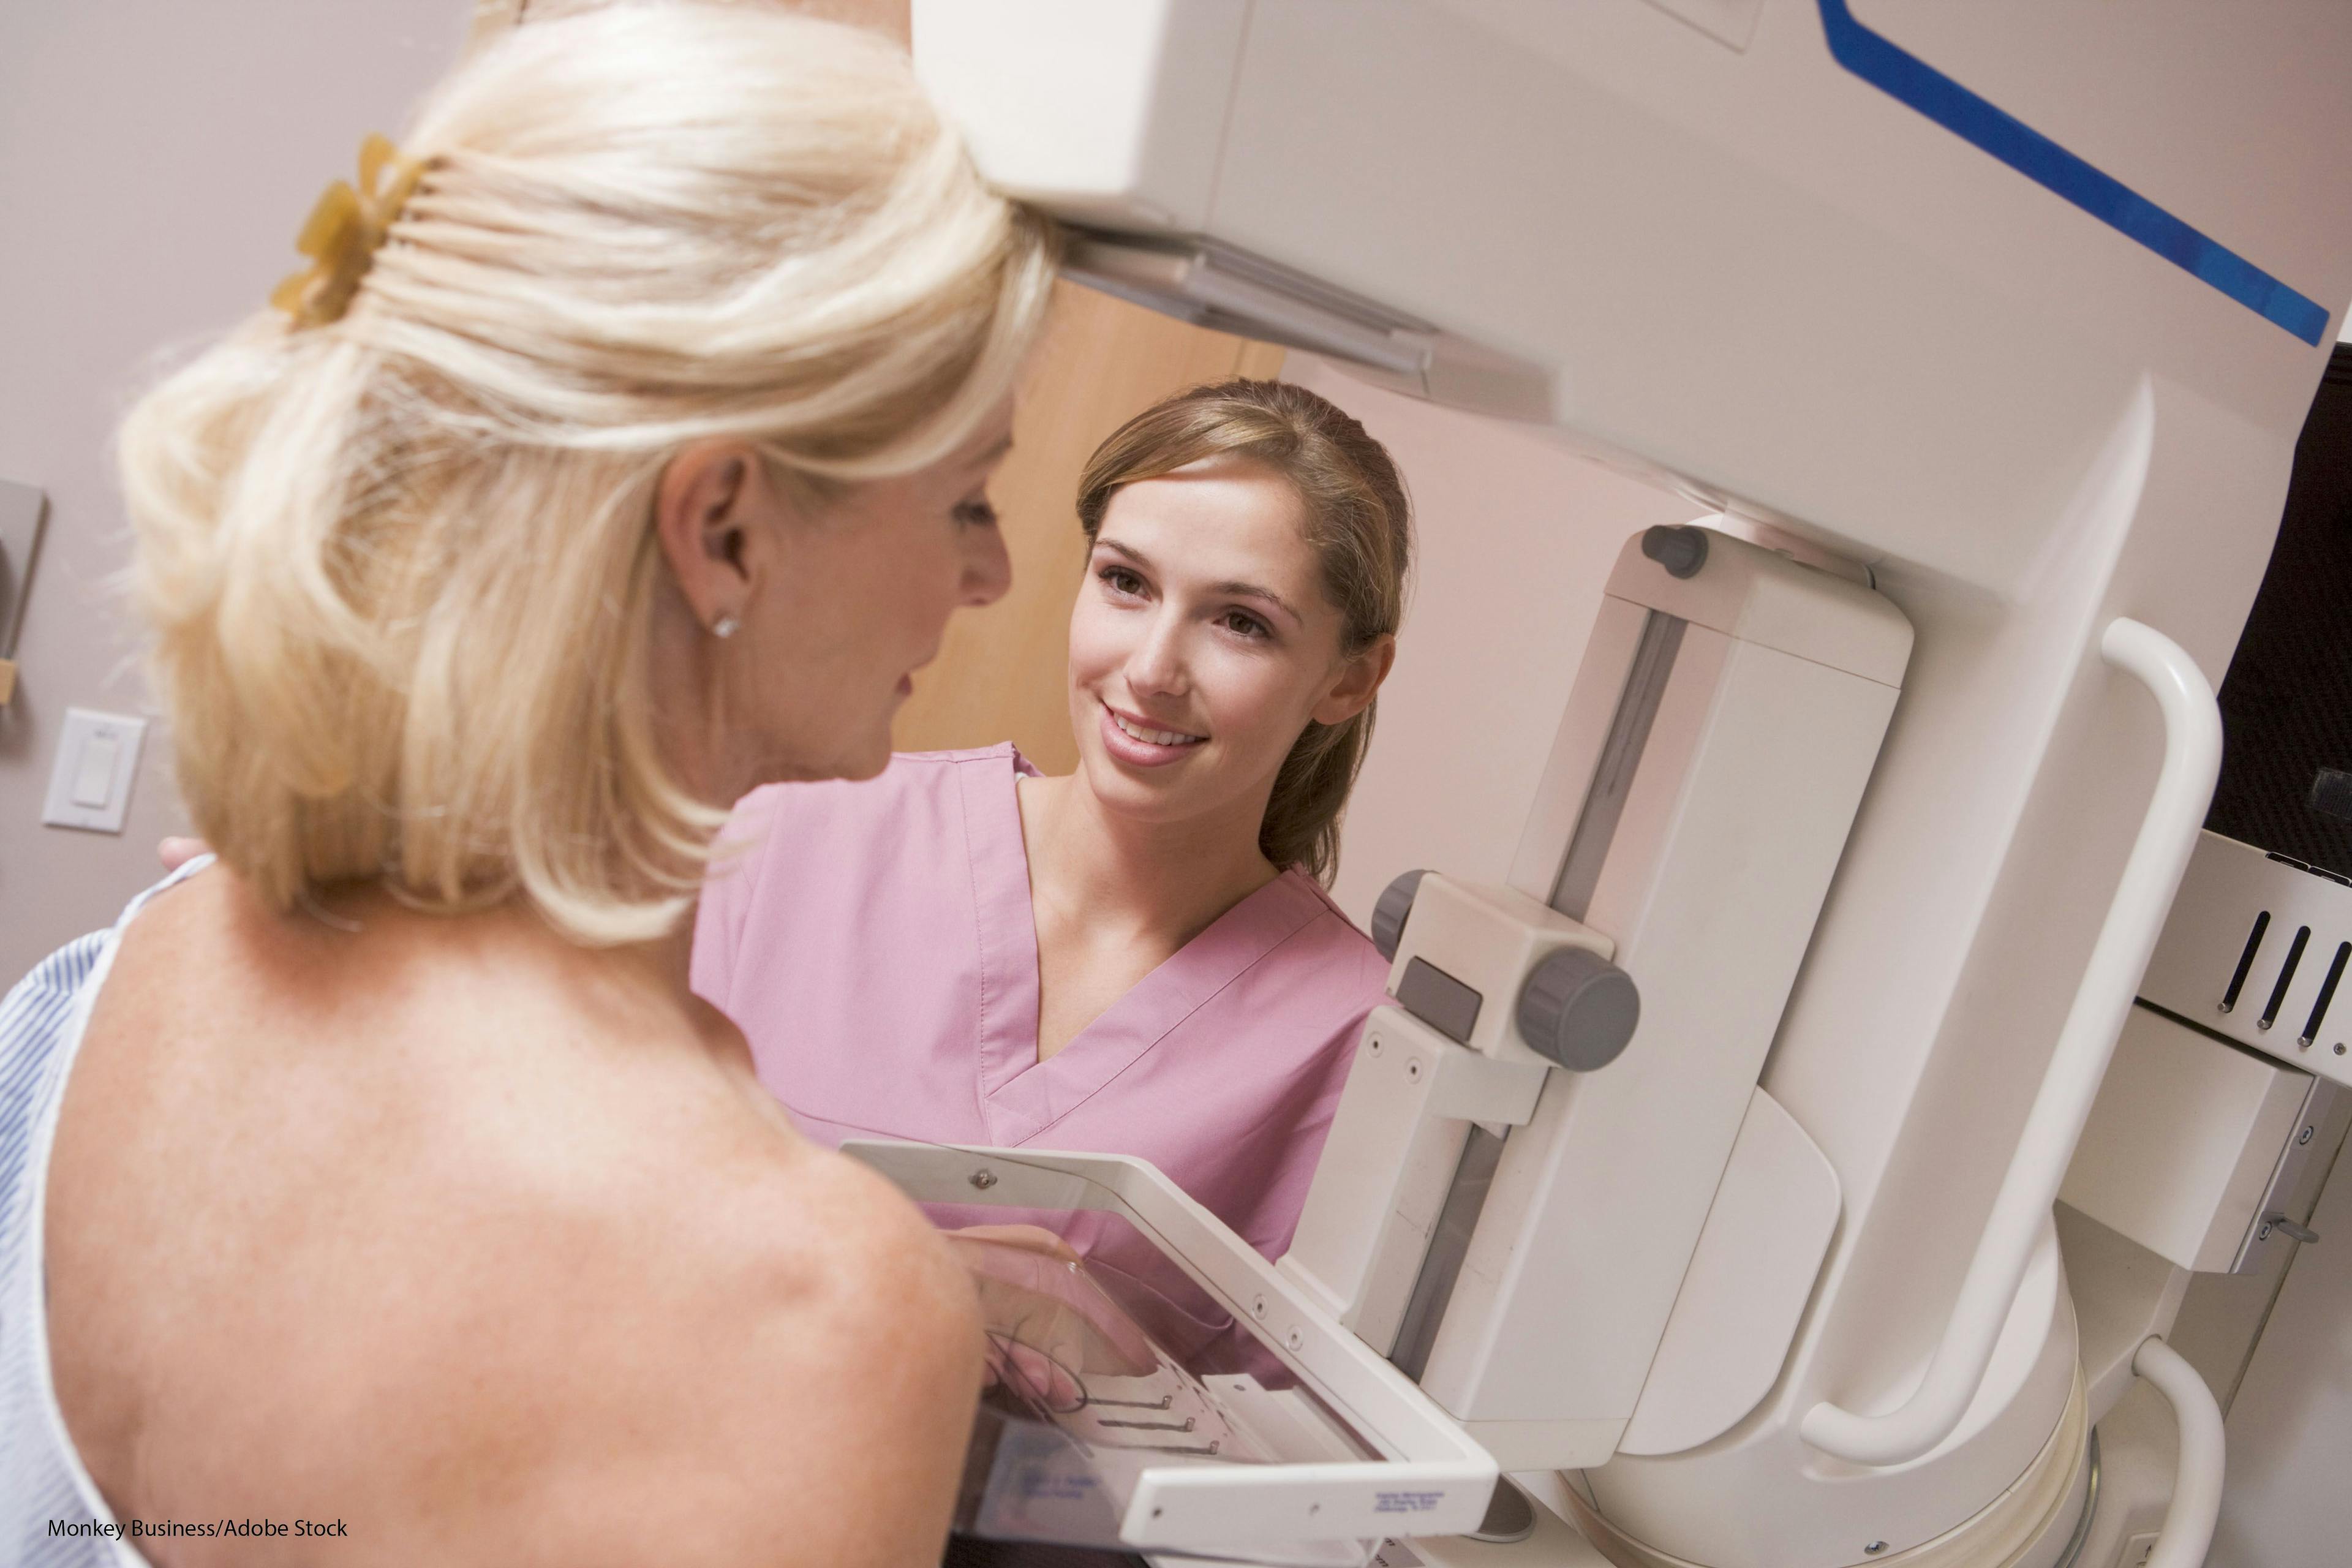 Mammography Screening Produces 41-Percent Drop in Risk of Breast Cancer Death